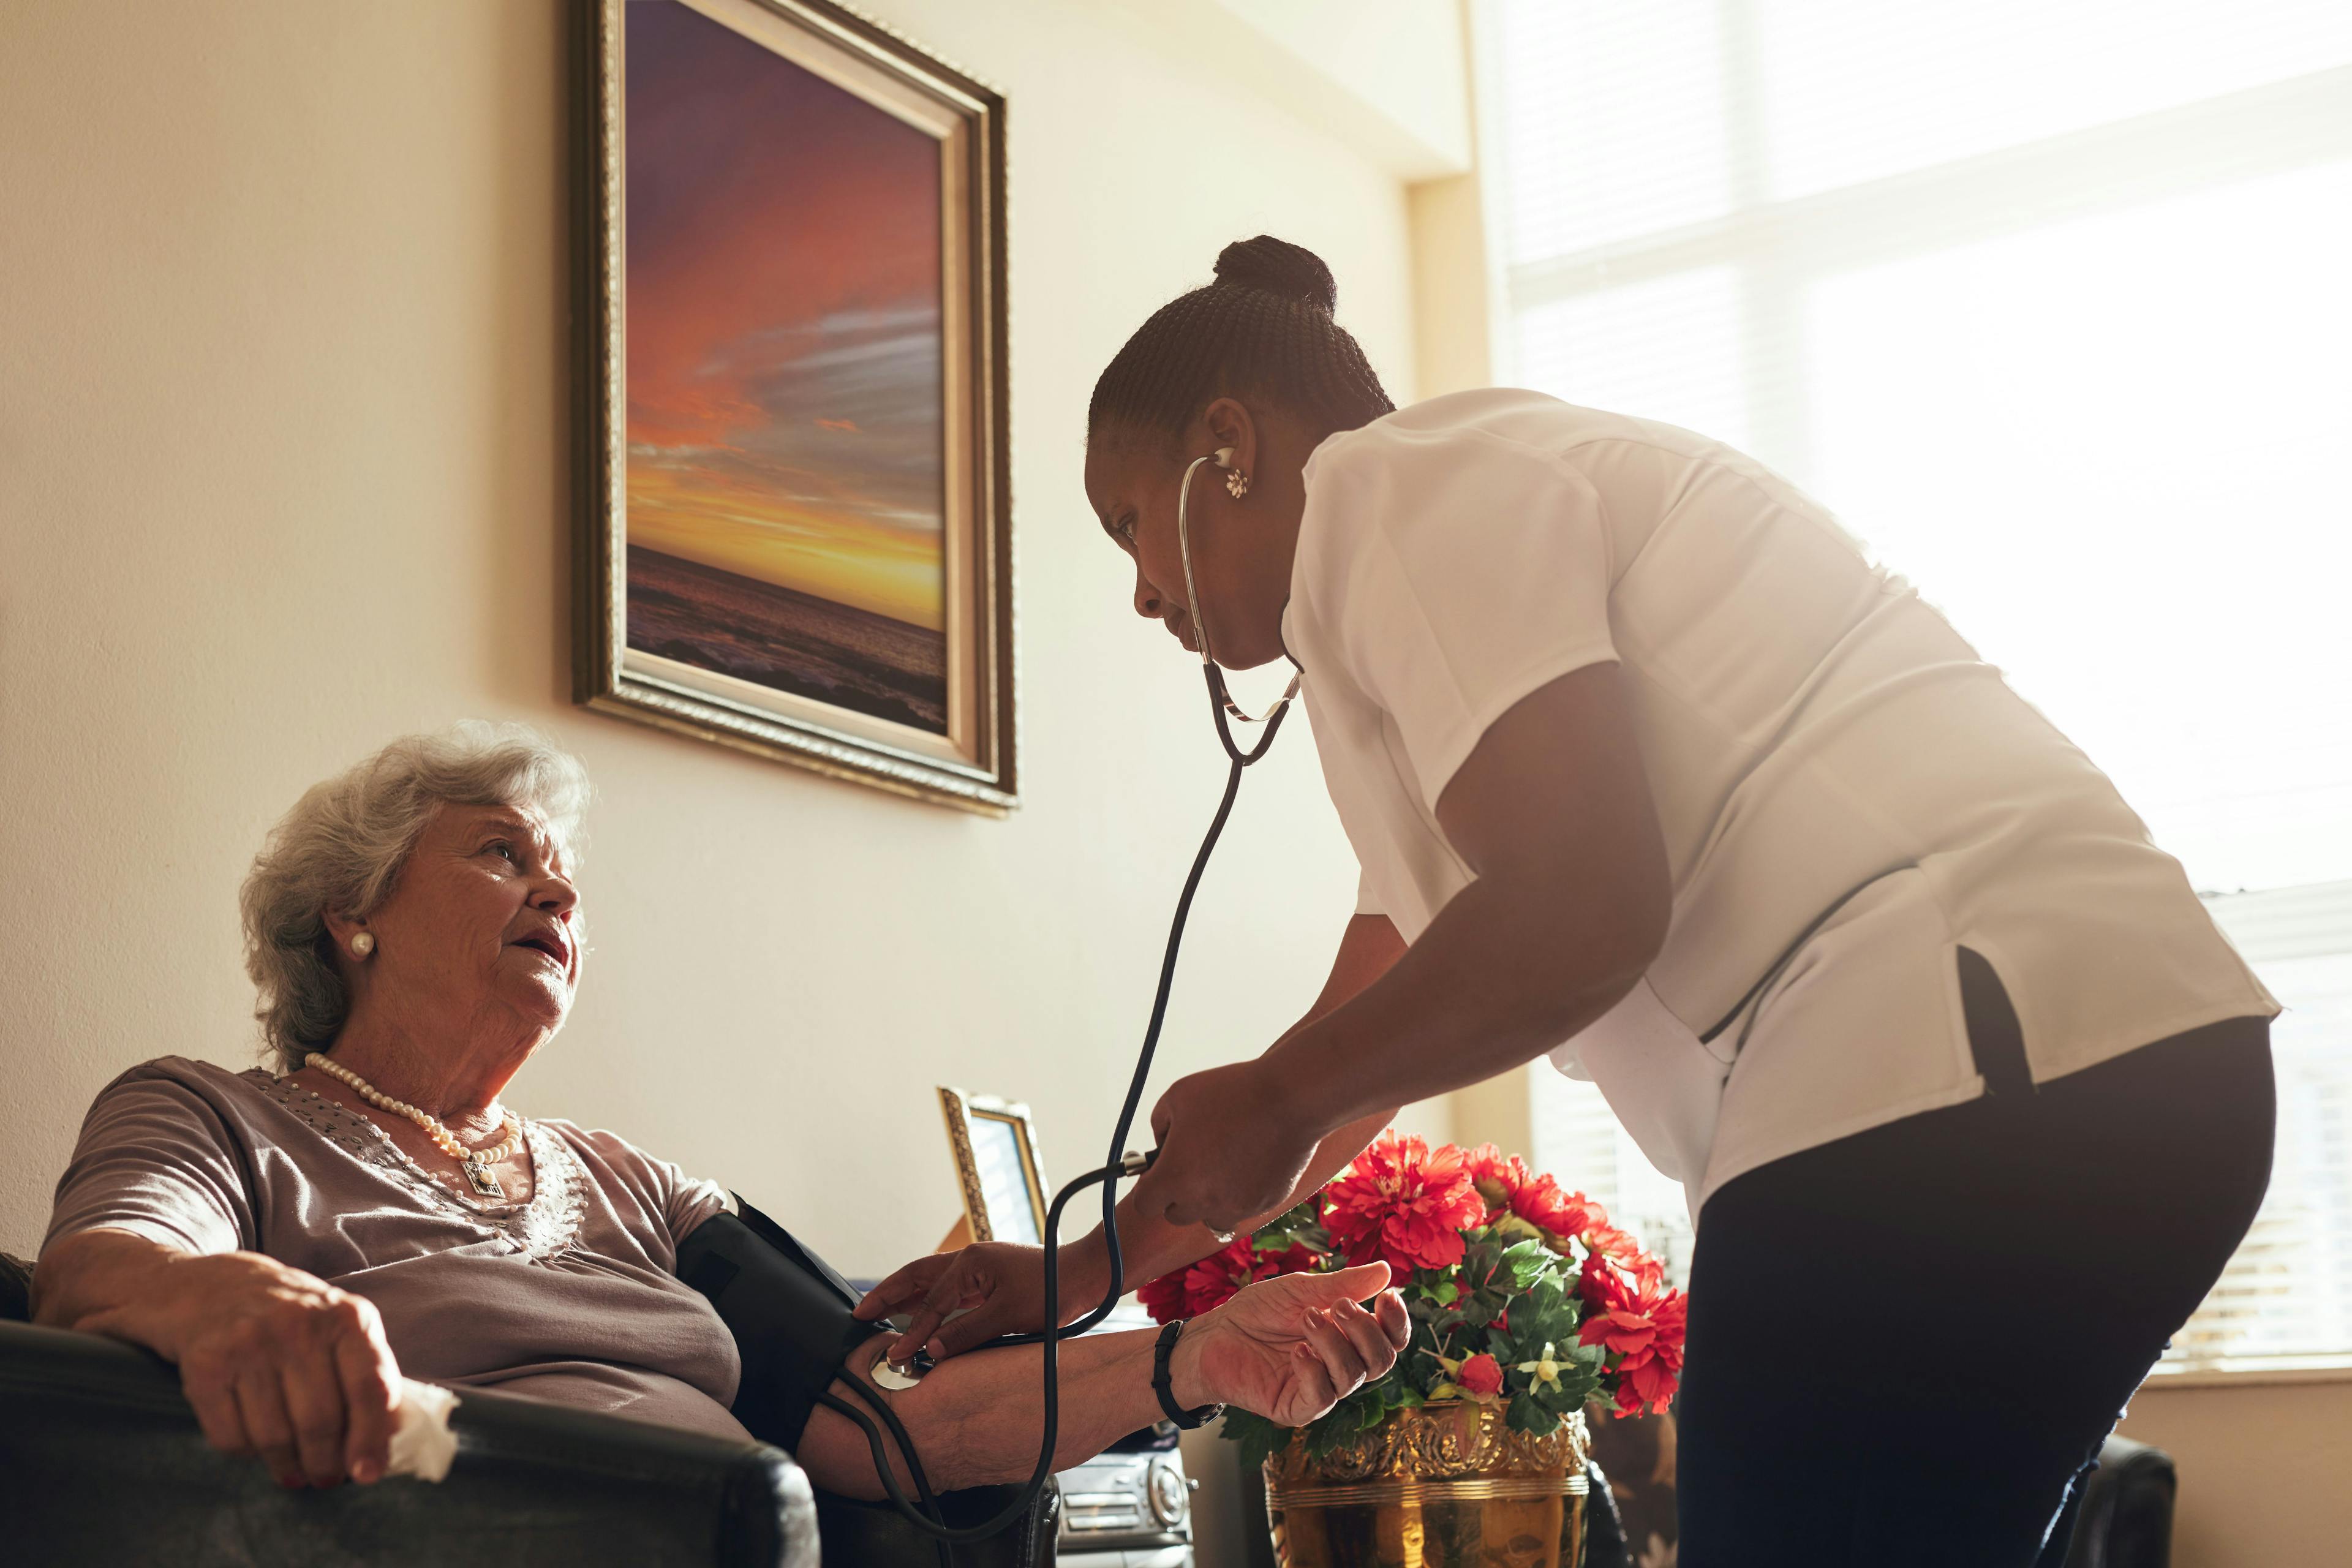 Staff Retention Continues to Be Challenging in Long-Term Care Facilities